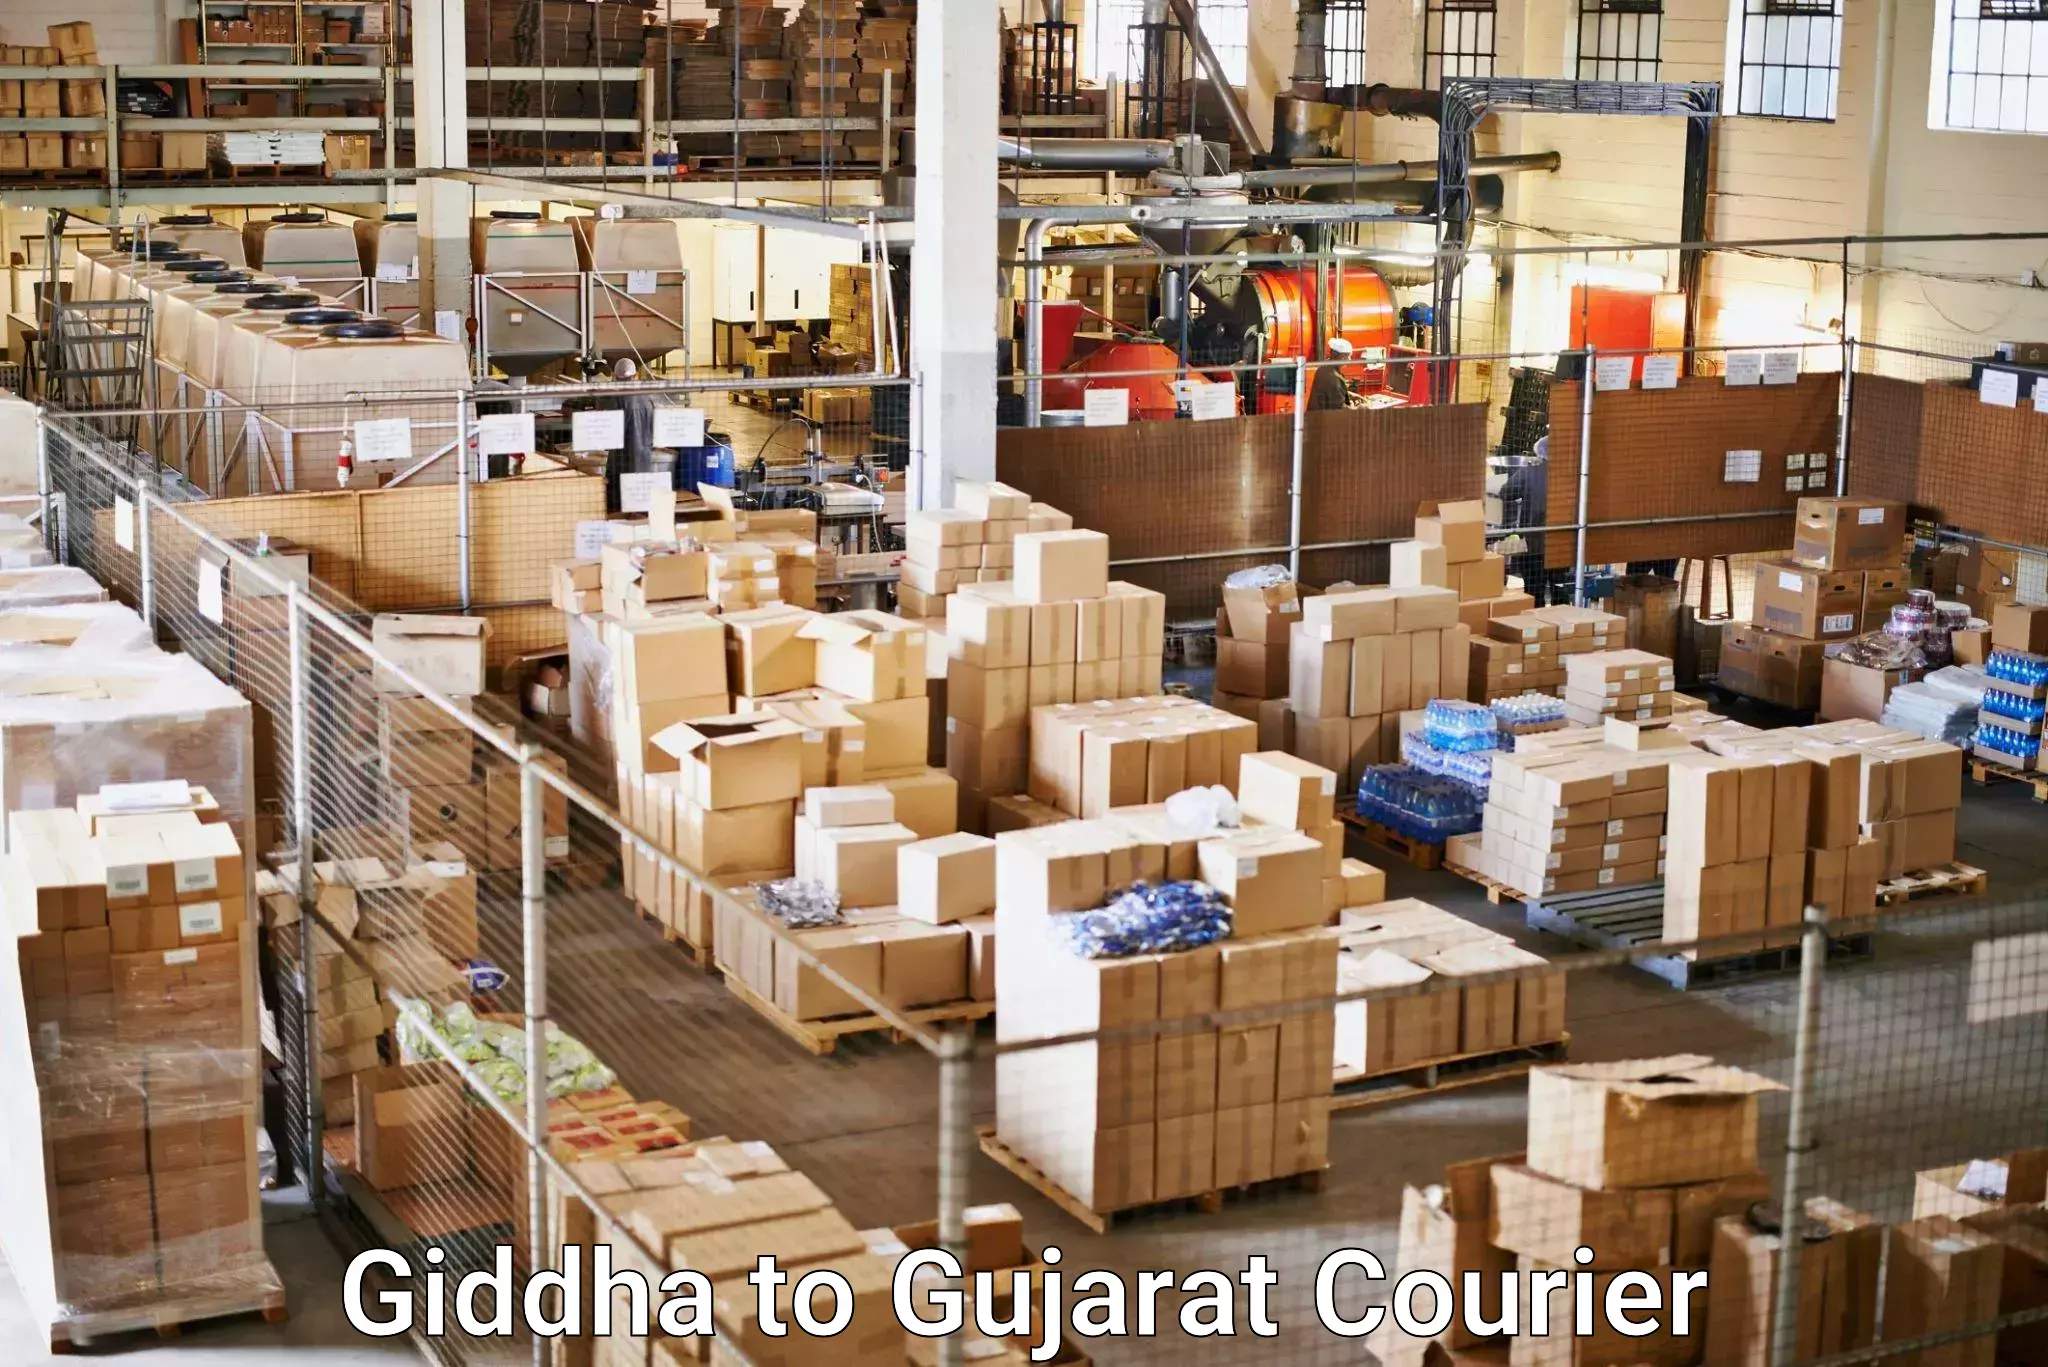 Reliable delivery network Giddha to Bhuj